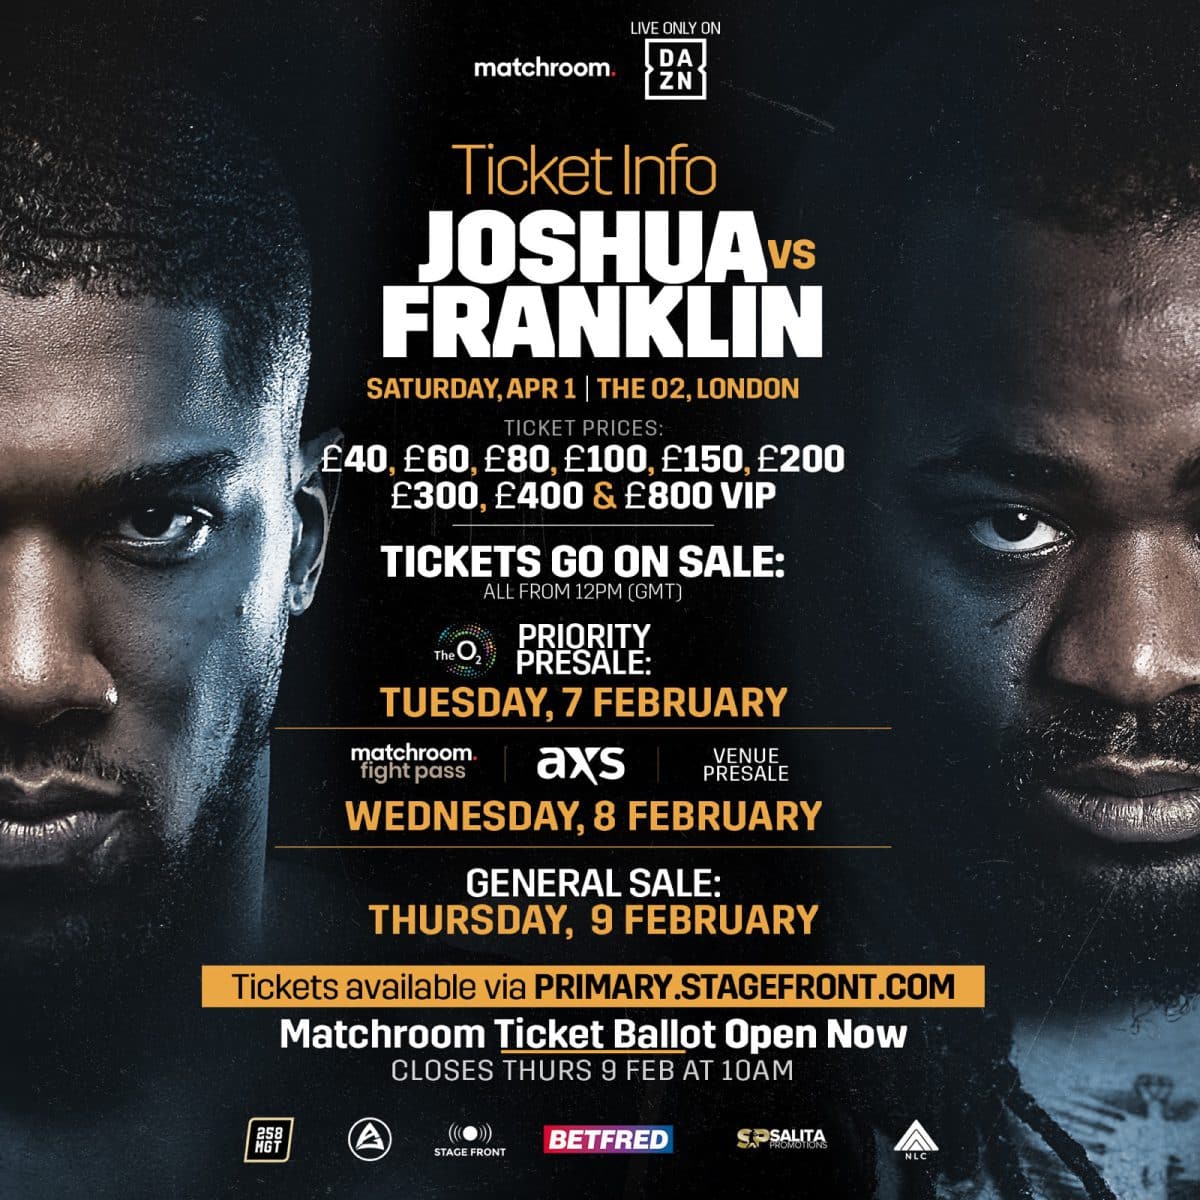 Image: Joshua - Franklin tickets on sale this week for April 1st fight at O2 Arena in London